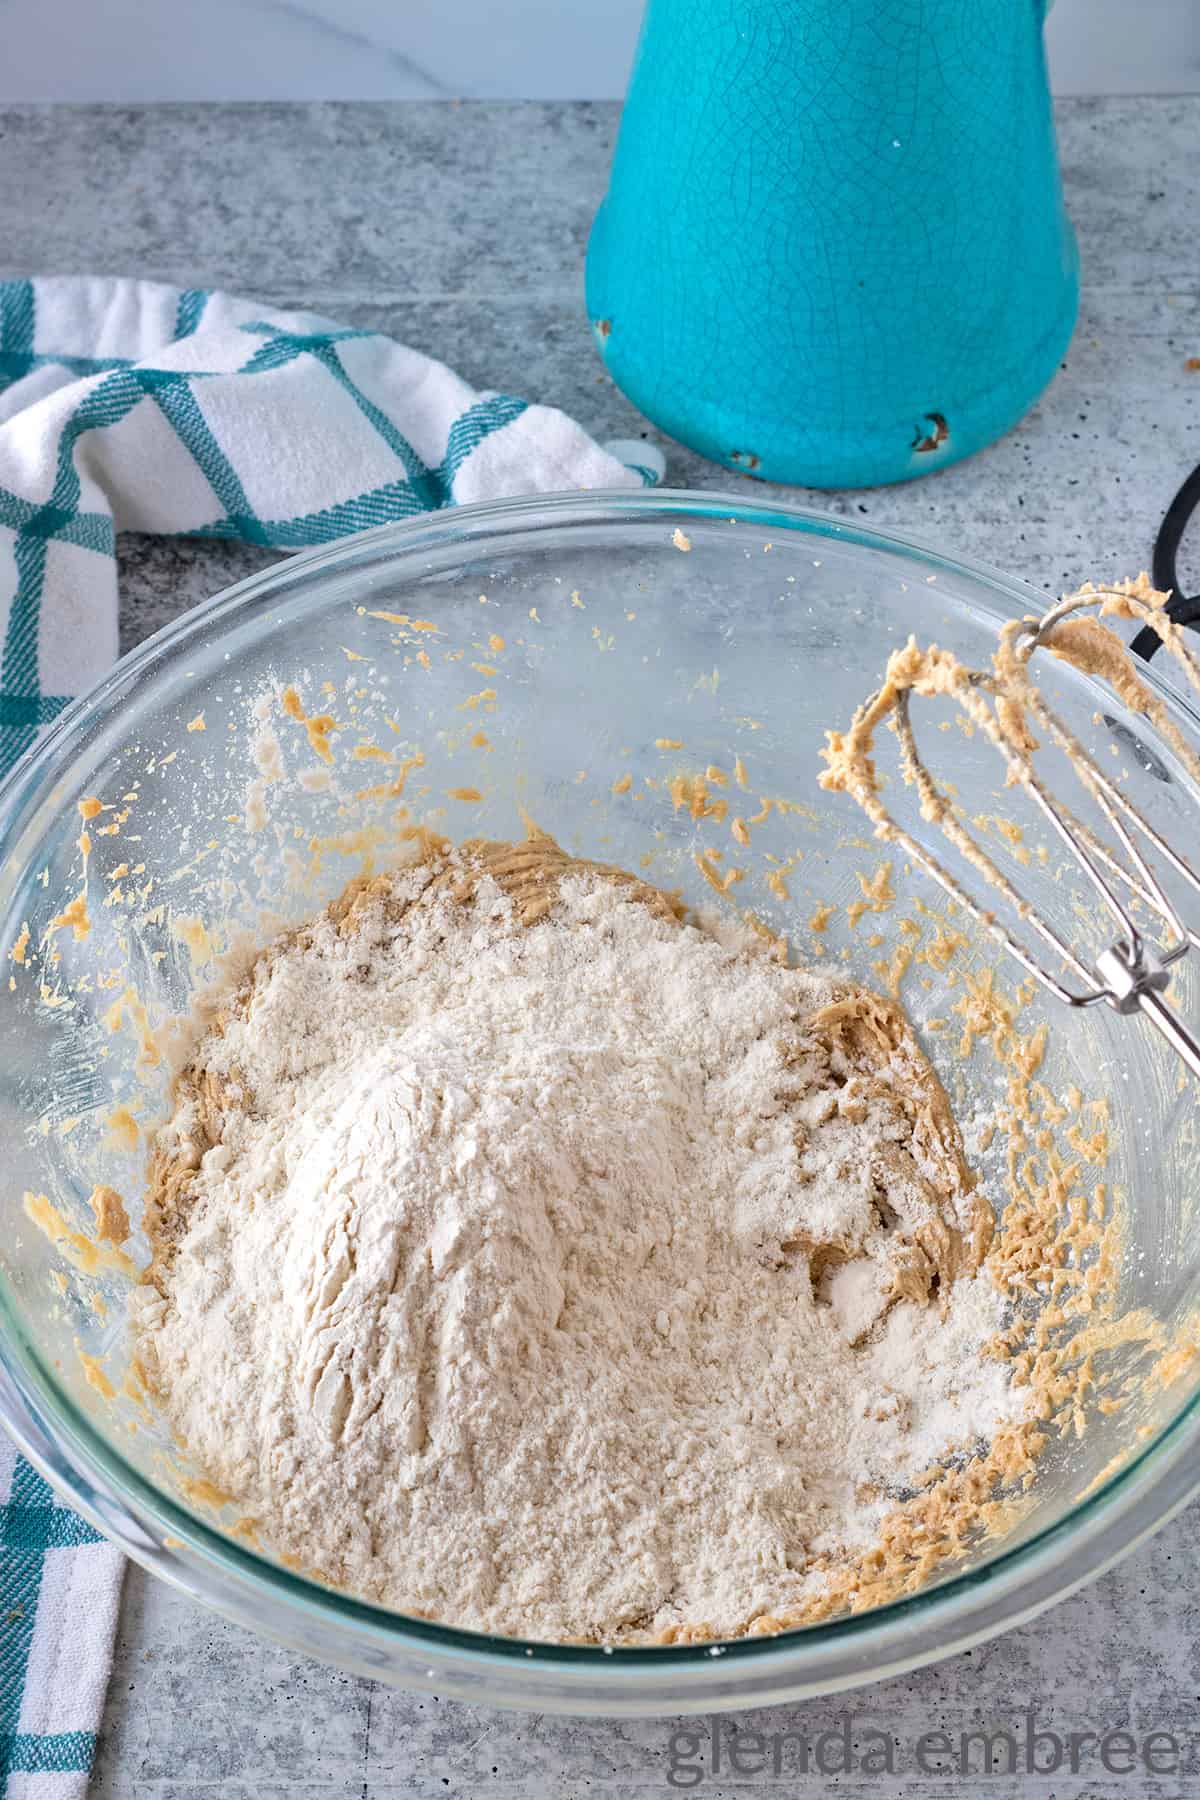 dry ingredients added to batter in a clear bowl on a concrete countertop